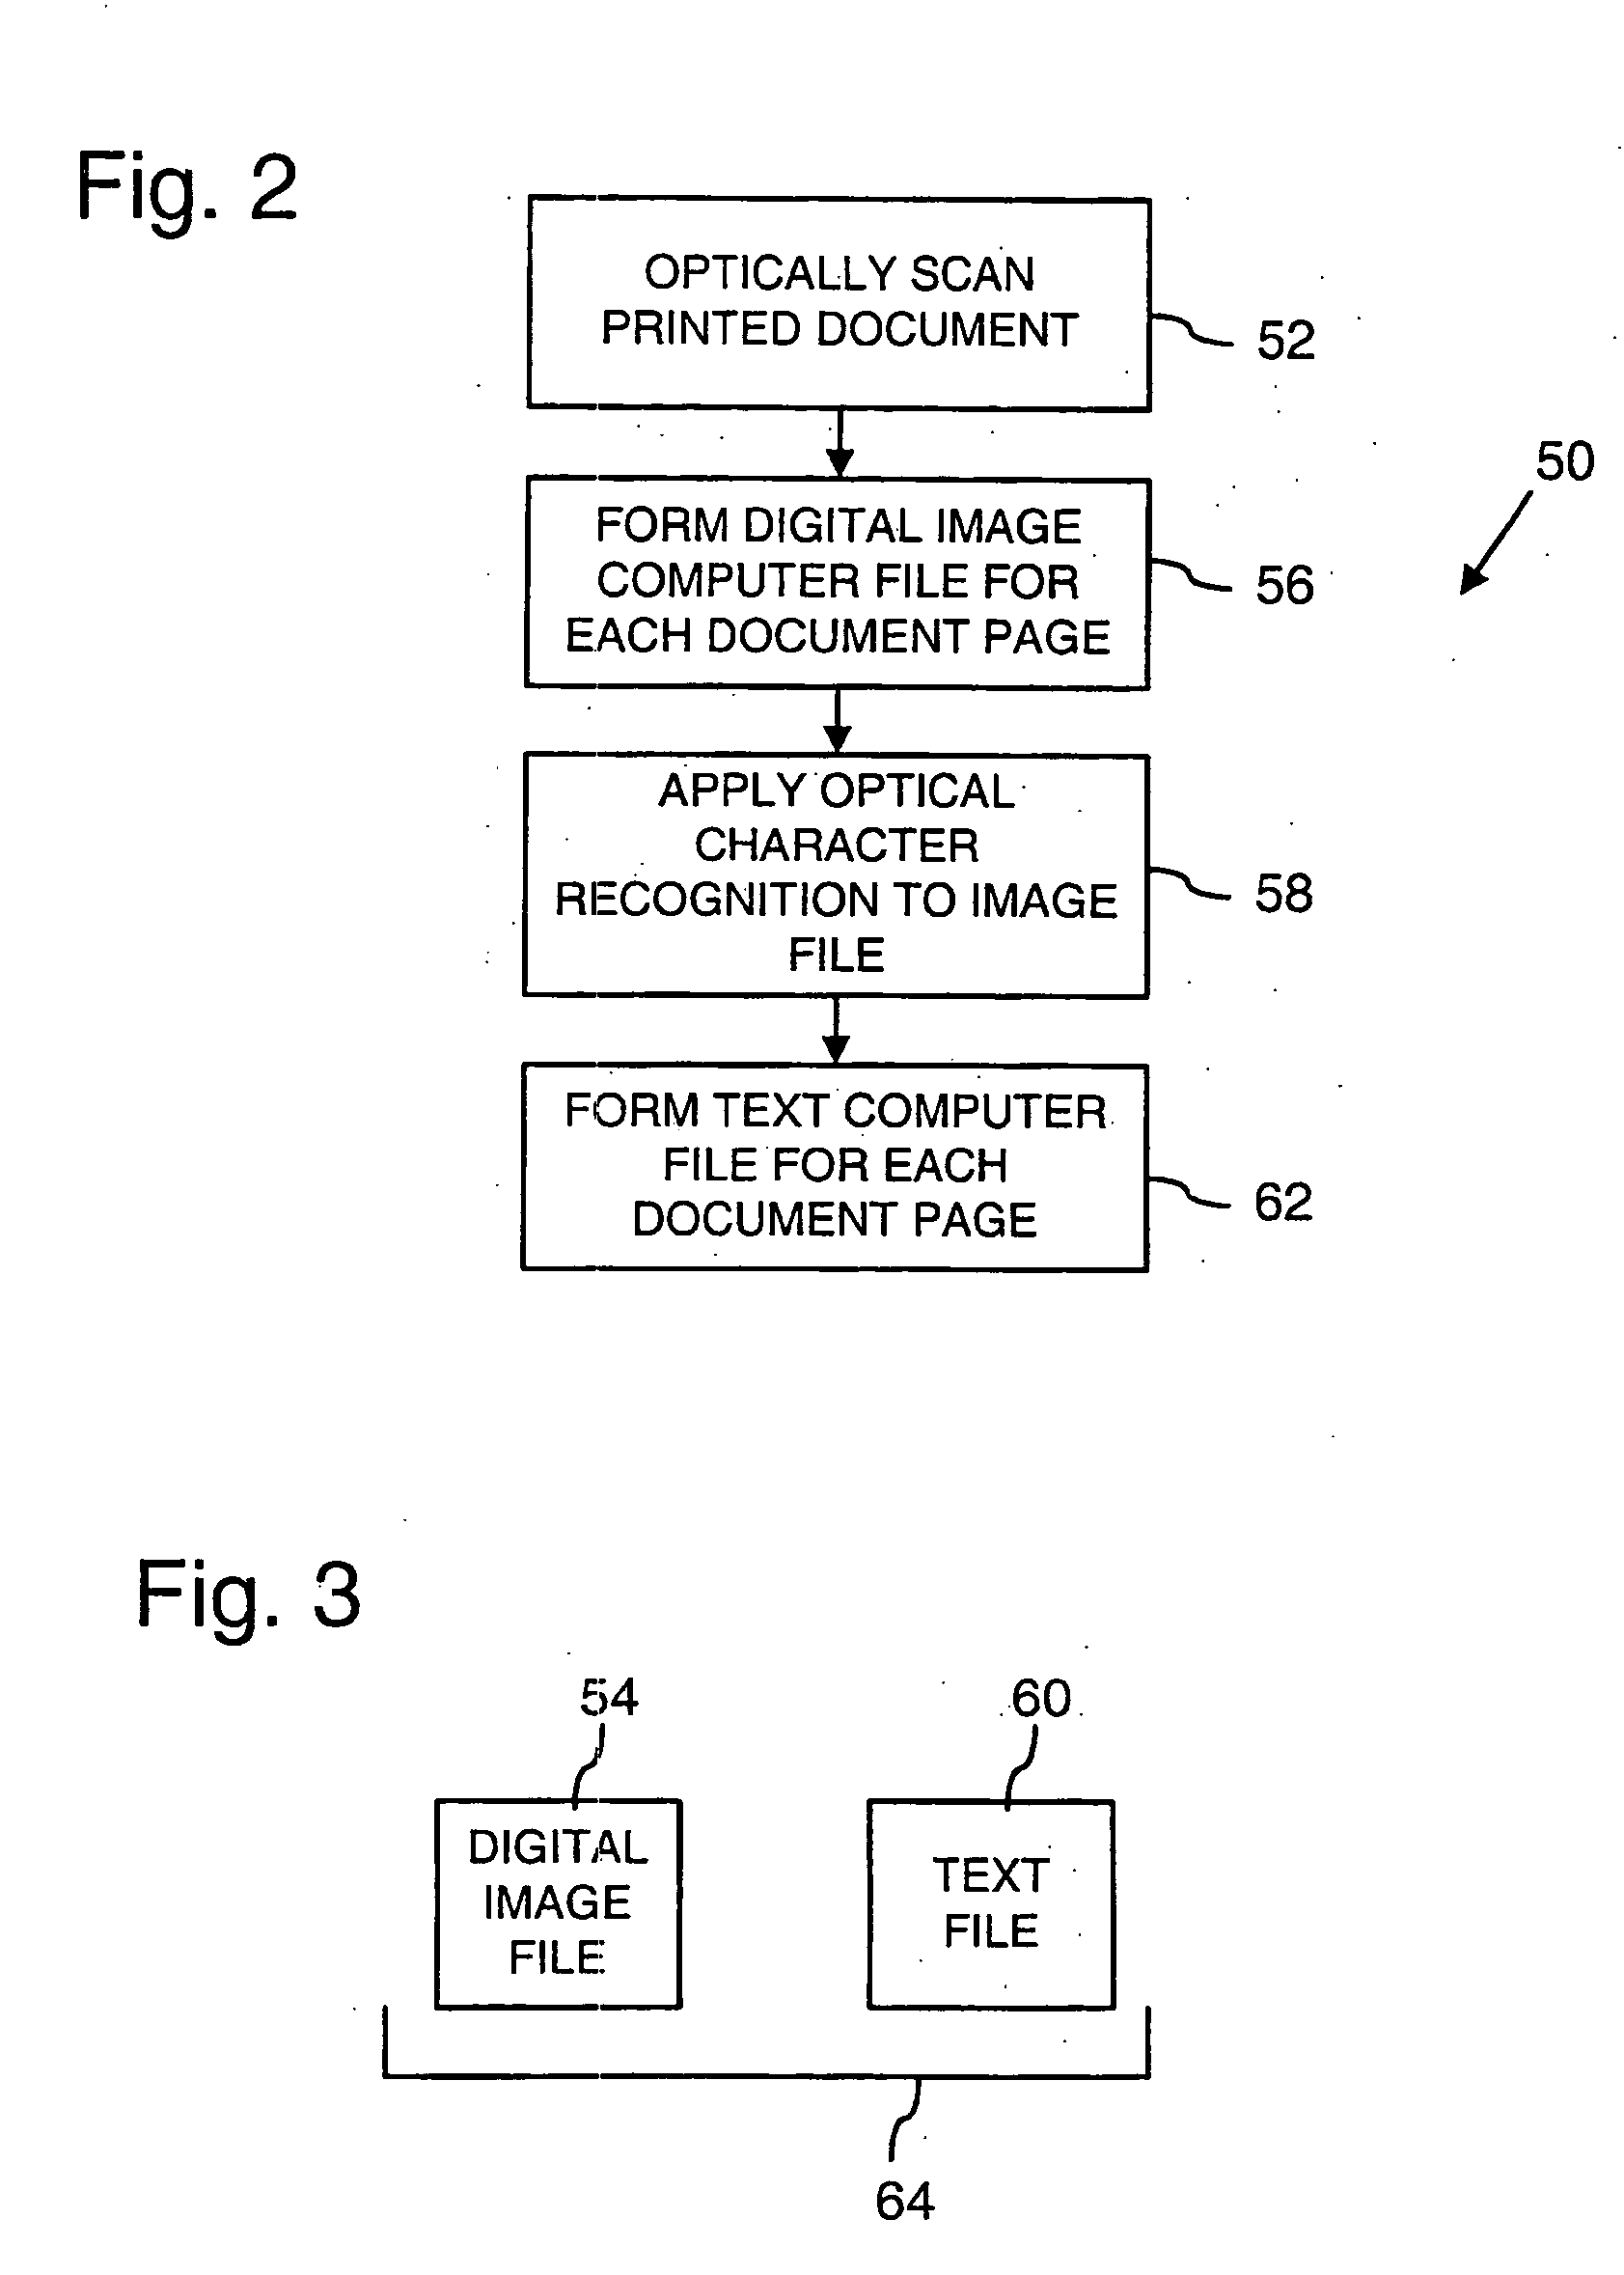 Document imaging and indexing system